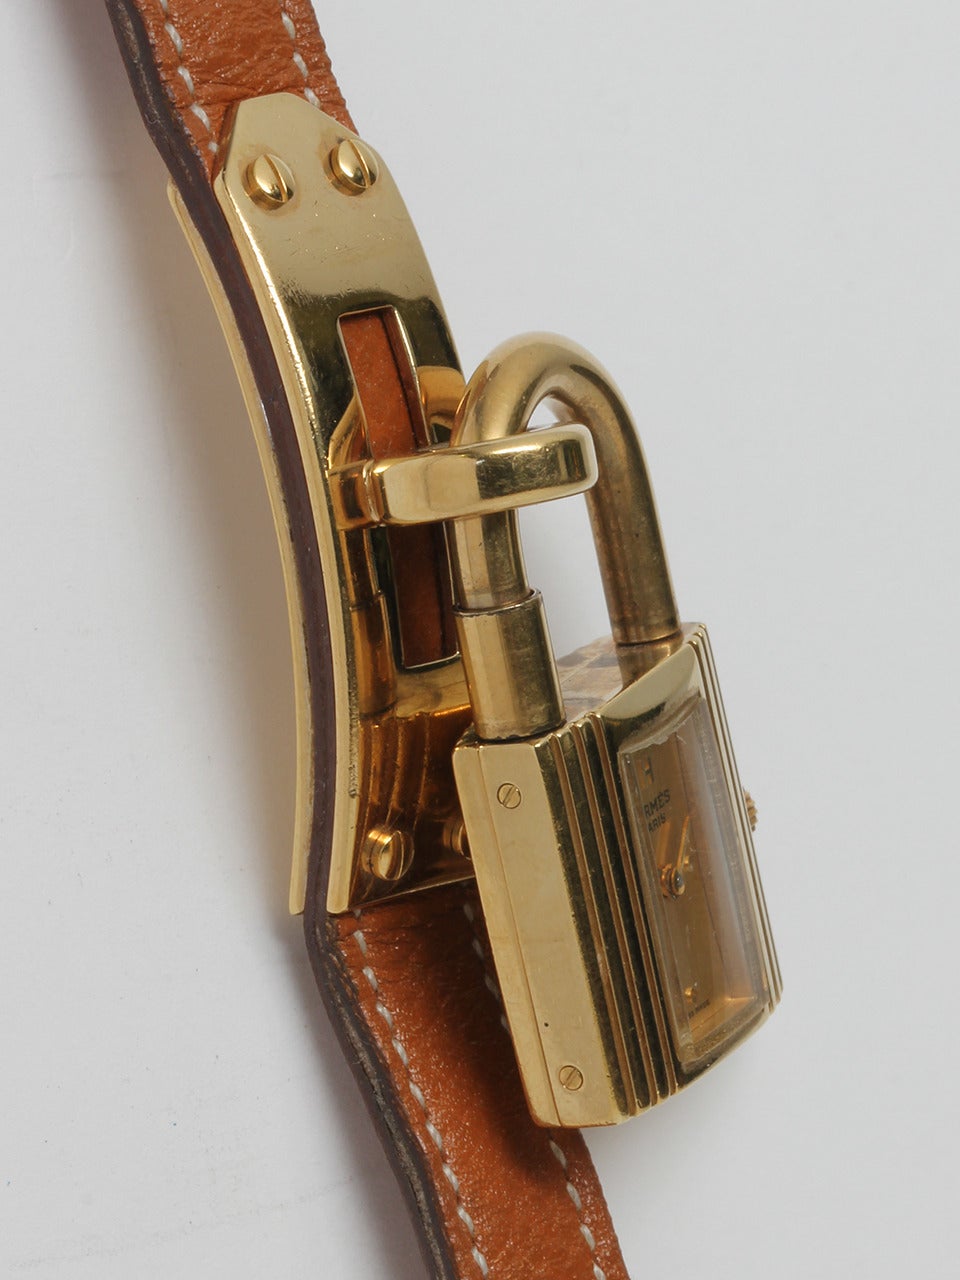 Hermes Gold Plated Kelly Lock Watch. Gold plated on stainless steel case in the shape of a lock measuring 20 x 20mm. The watch dangles from a gold plated base on tan Hermes Epsom leather strap with tang buckle. The watch features a gold color dial